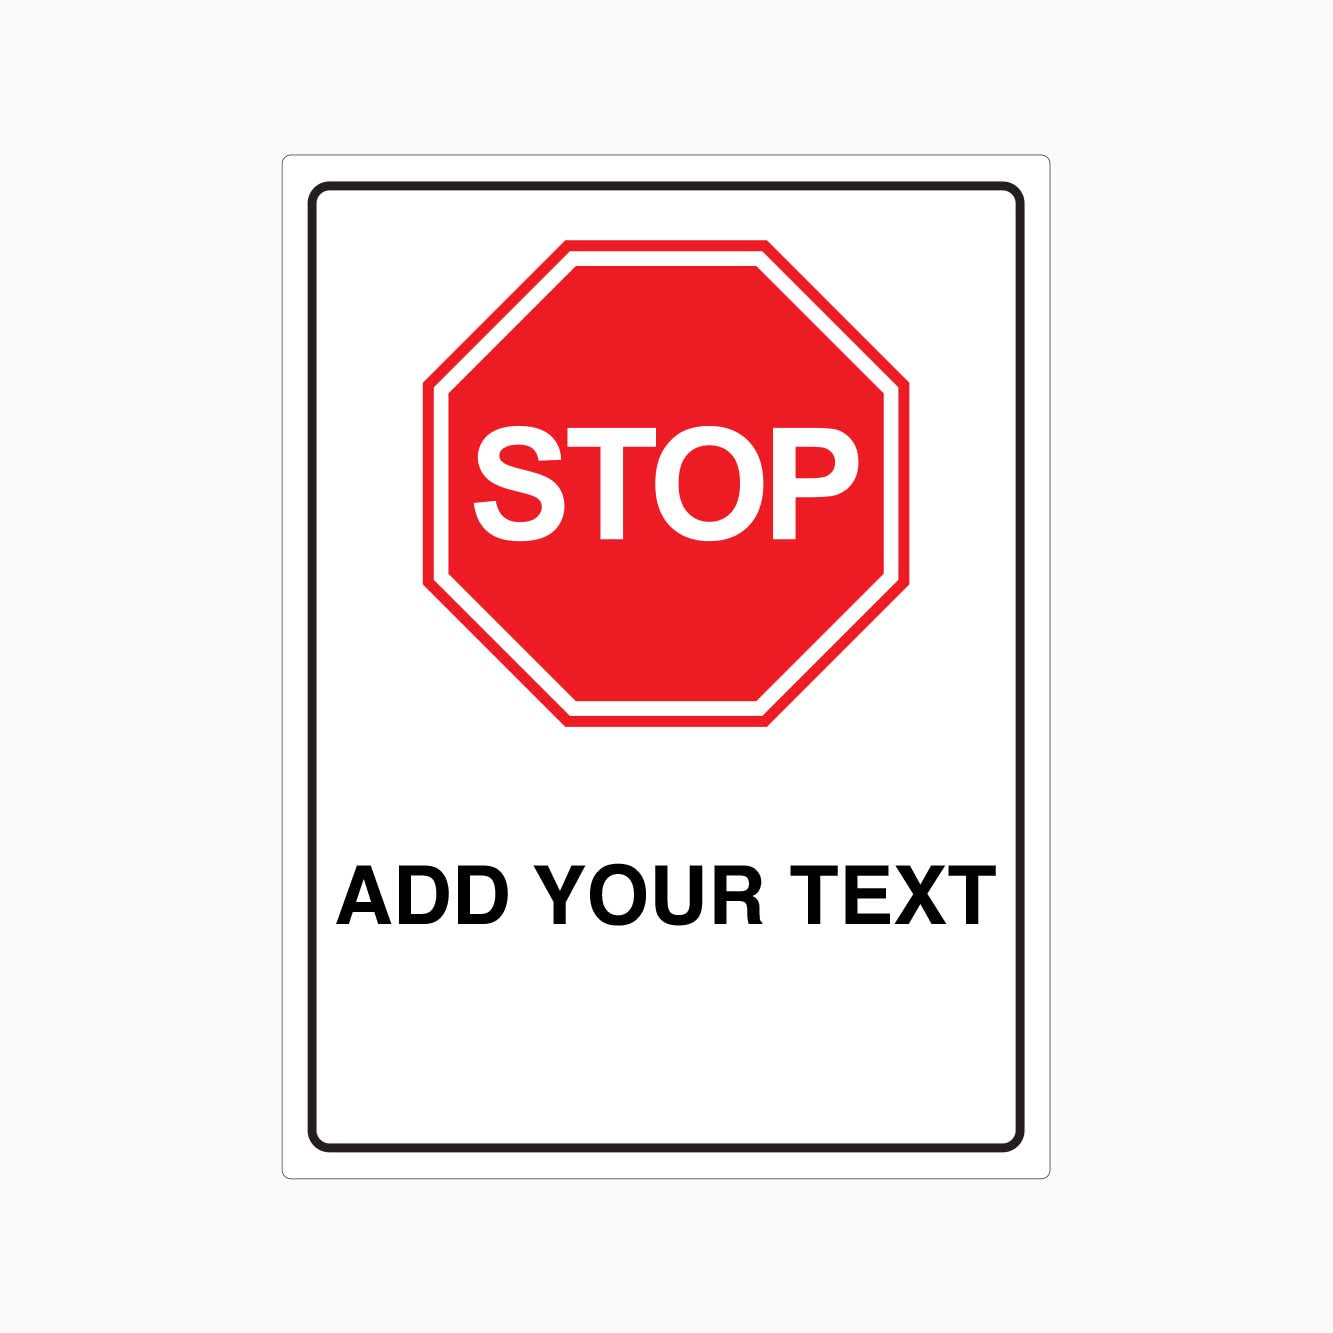 STOP SIGN with custom text - GET SIGNS